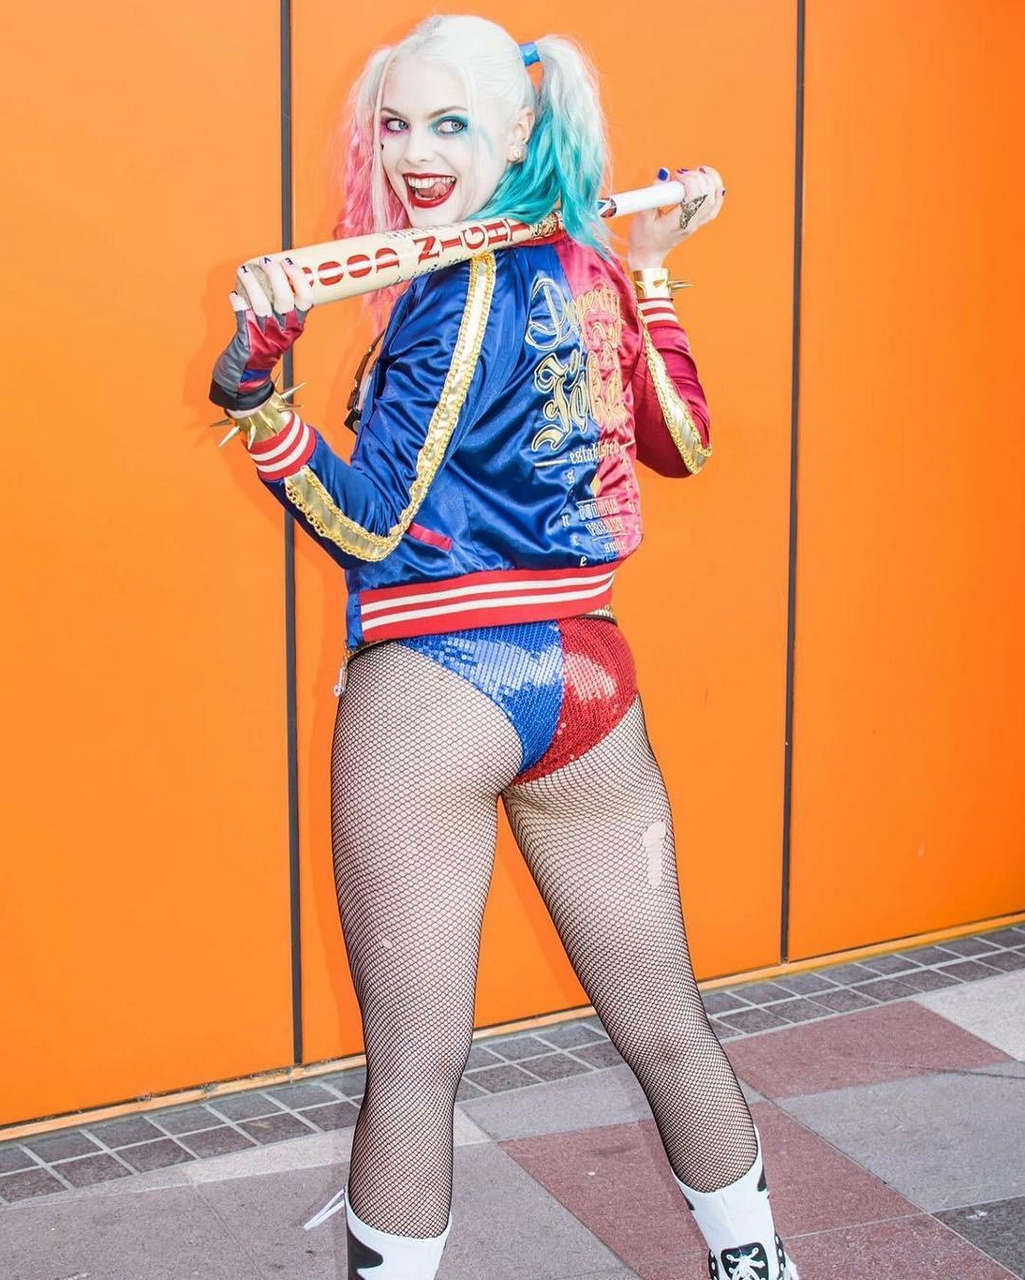 Infamousbylaura As Harley Quin